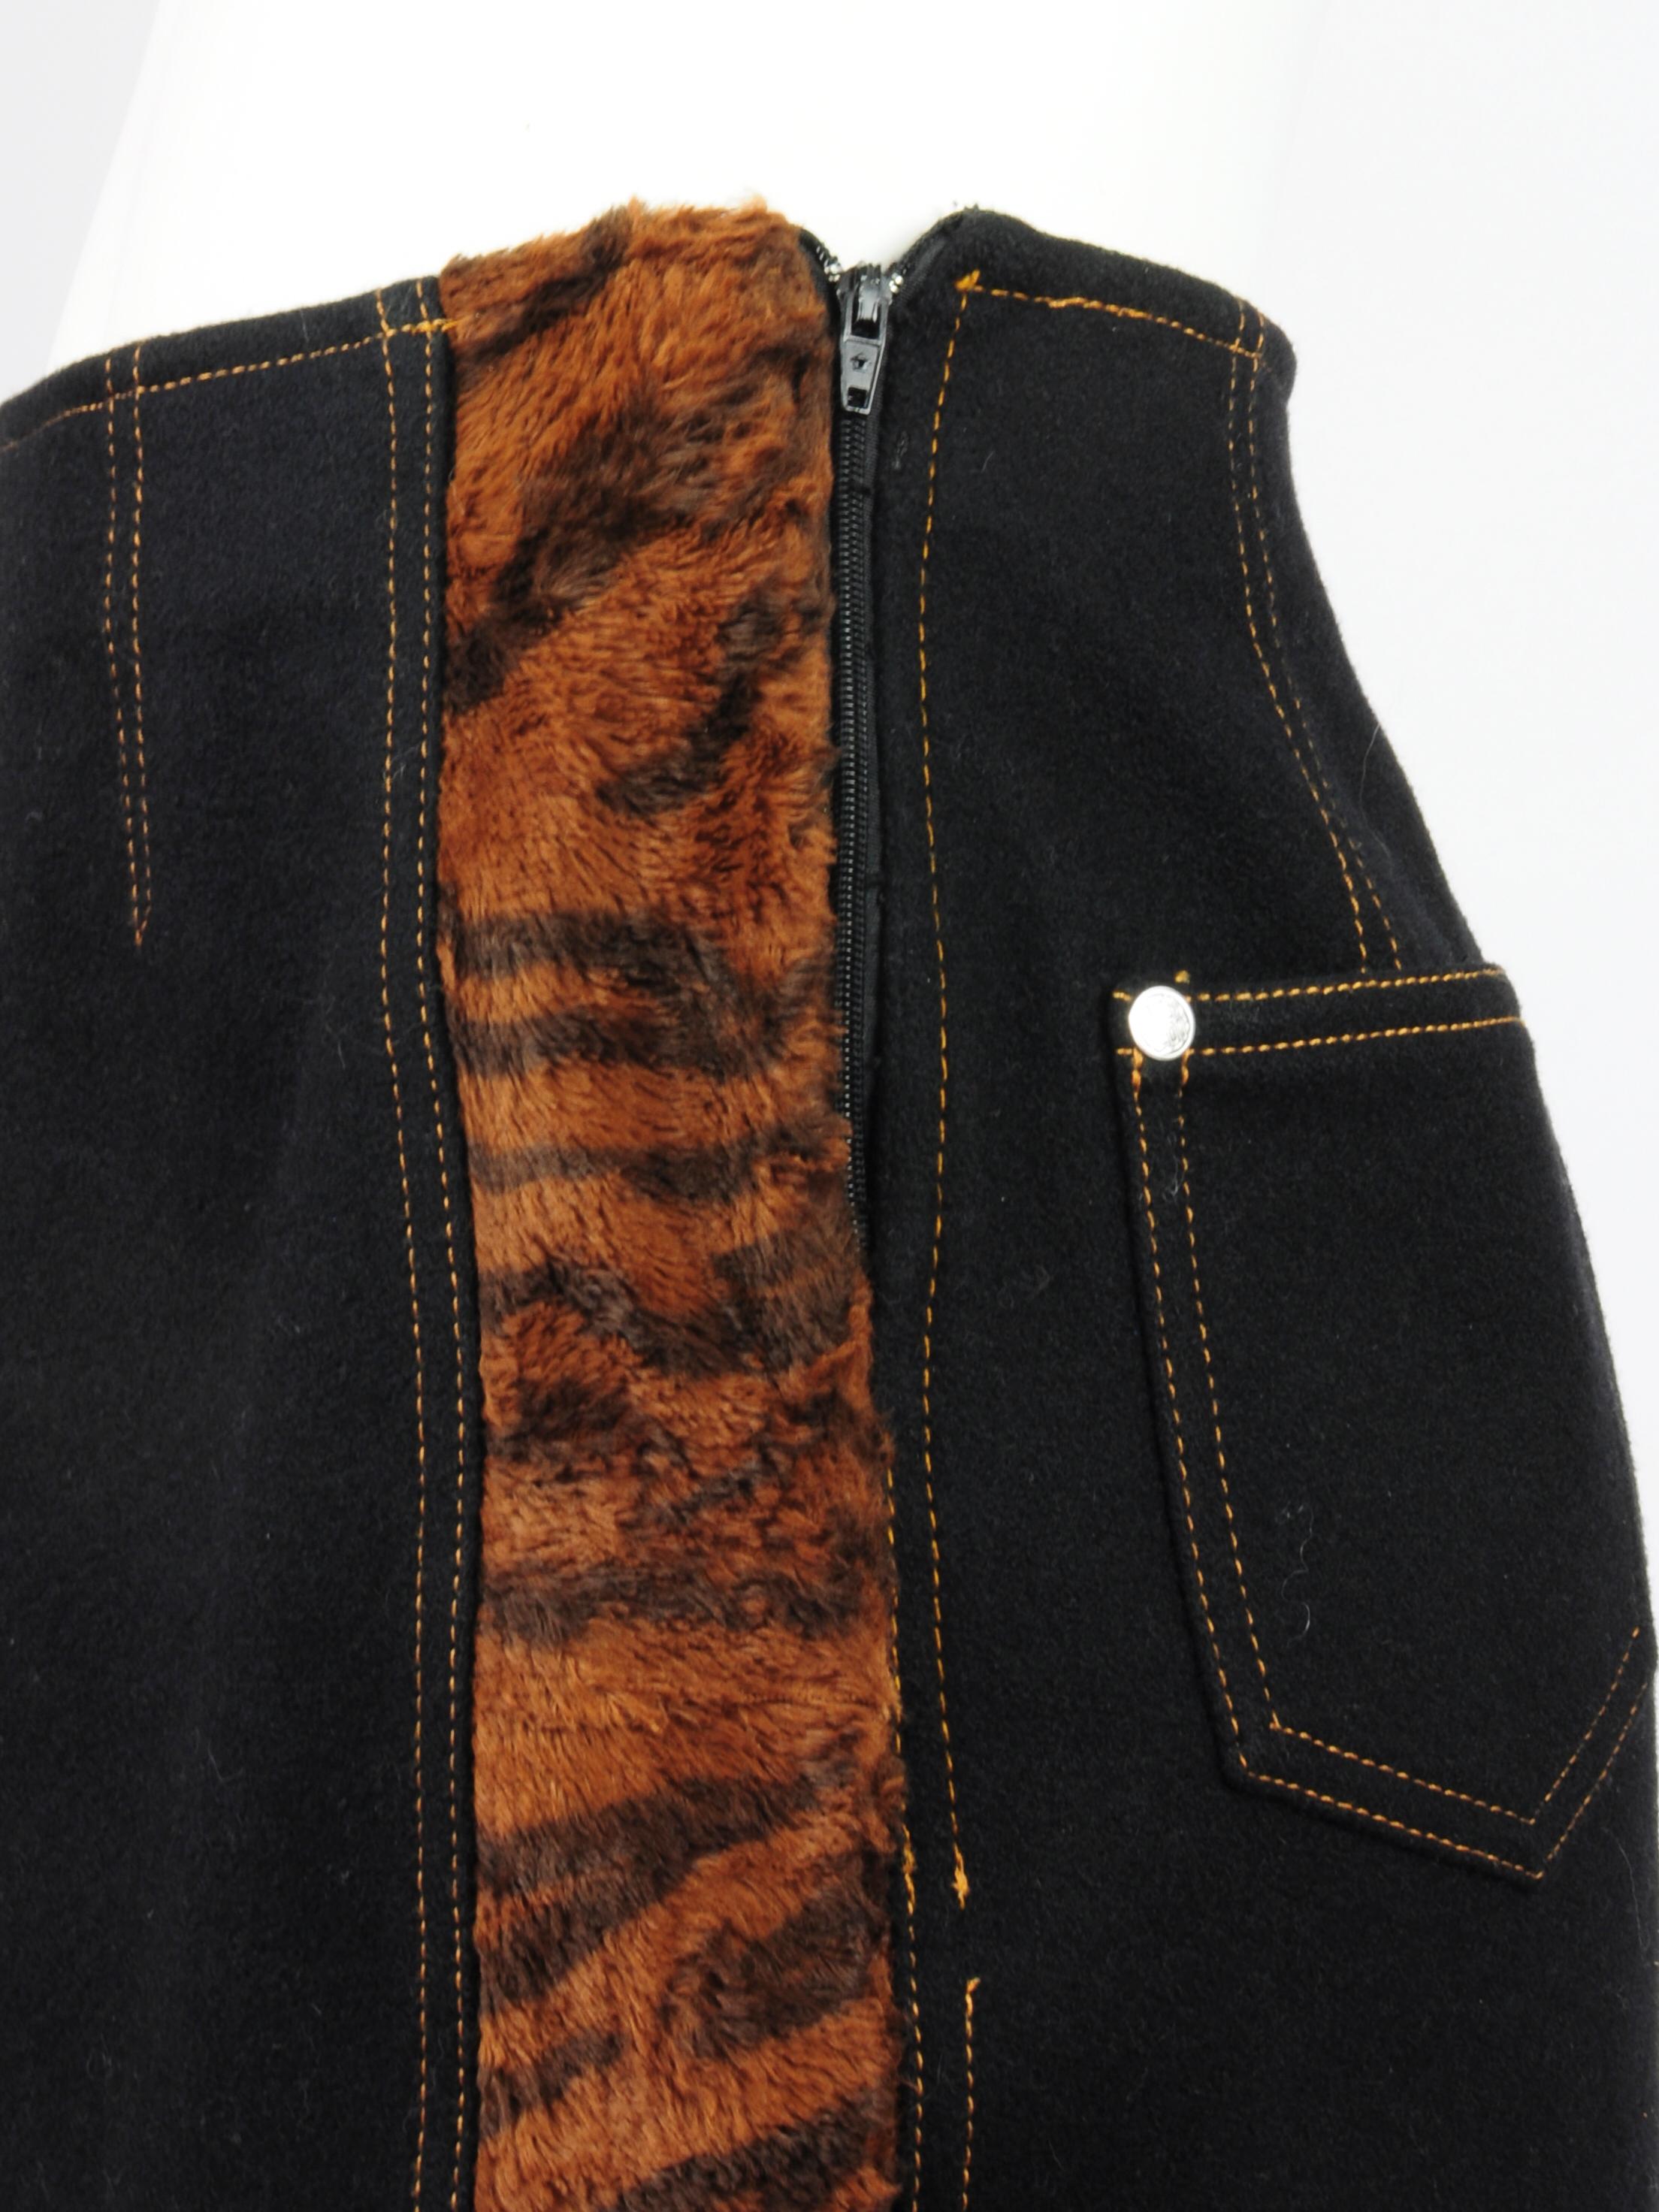 Kenzo Jeans Wool Skirt Suit with Faux Fur Tiger Details 1990s  For Sale 7